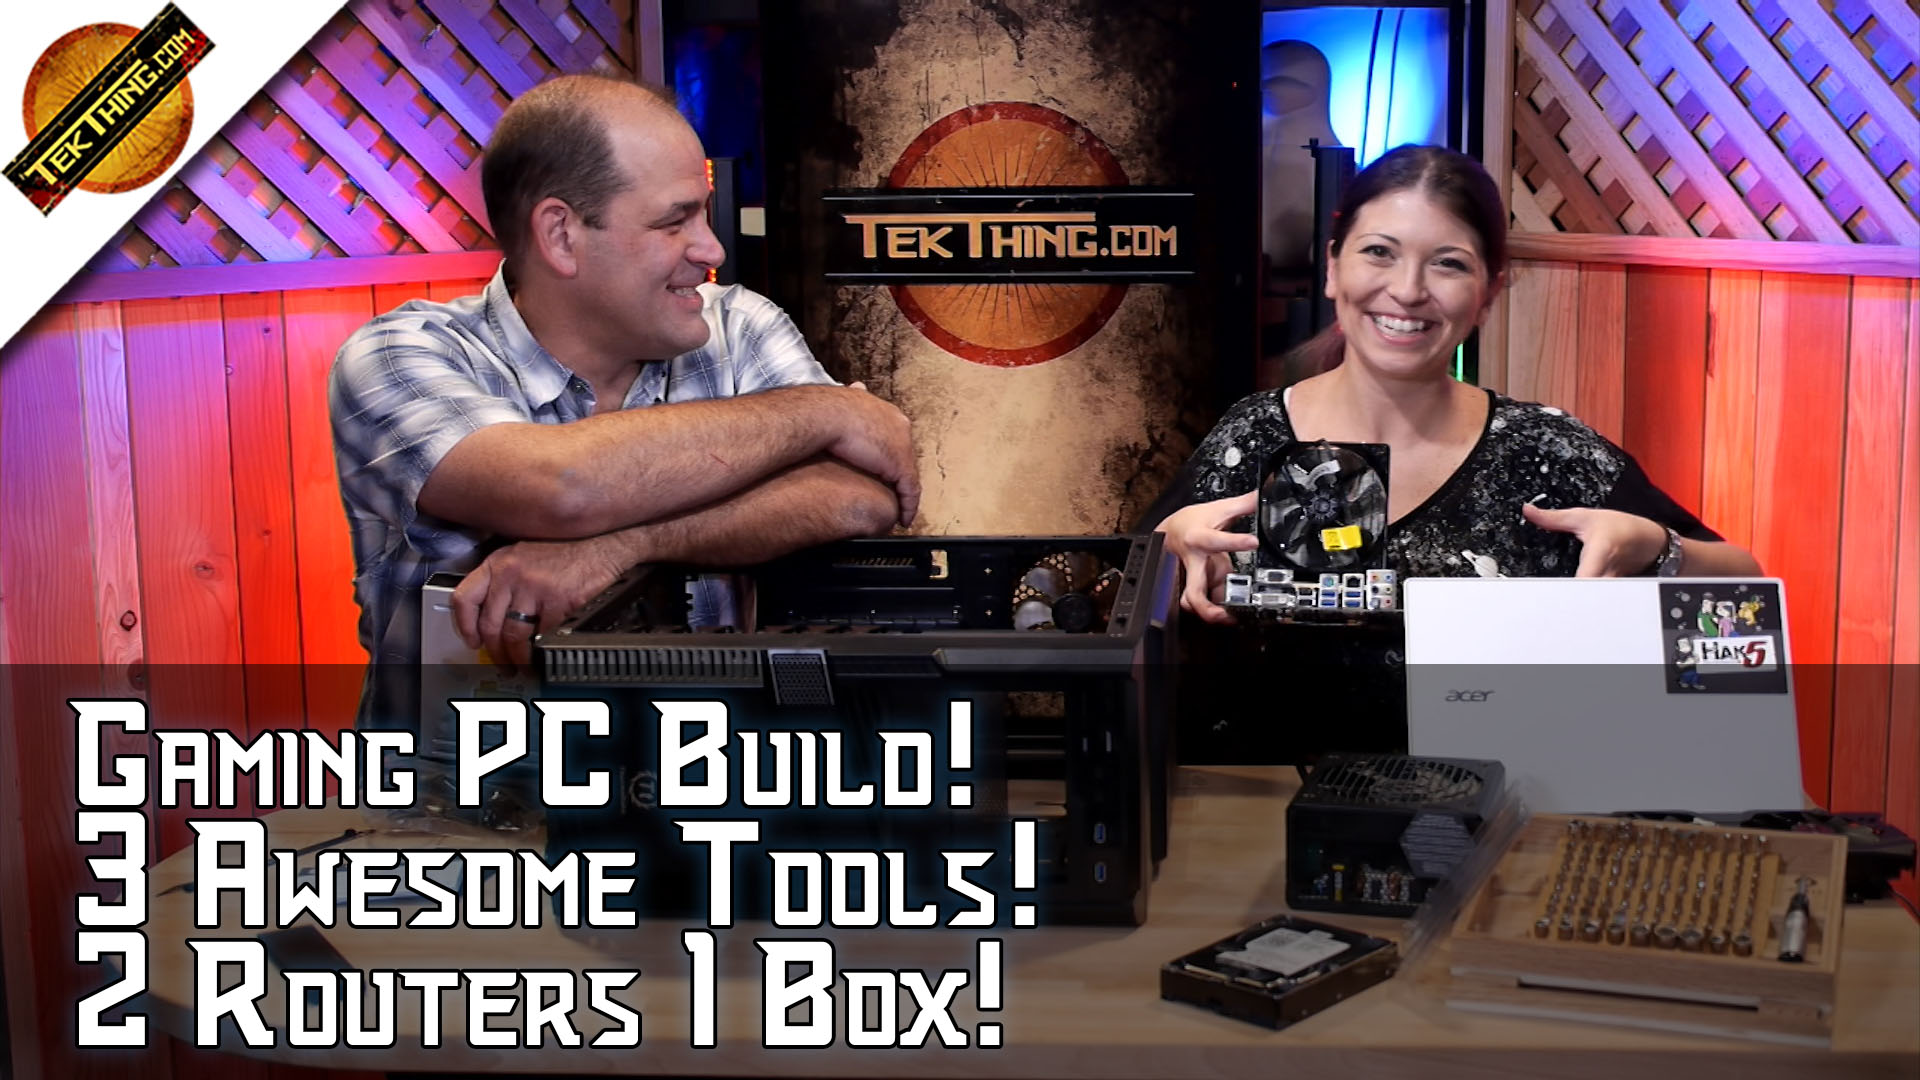 Gaming PC Build! Skip USB 3.1? 3 Awesome Measuring Tools, Two Routers One Box: Linux Route Command!